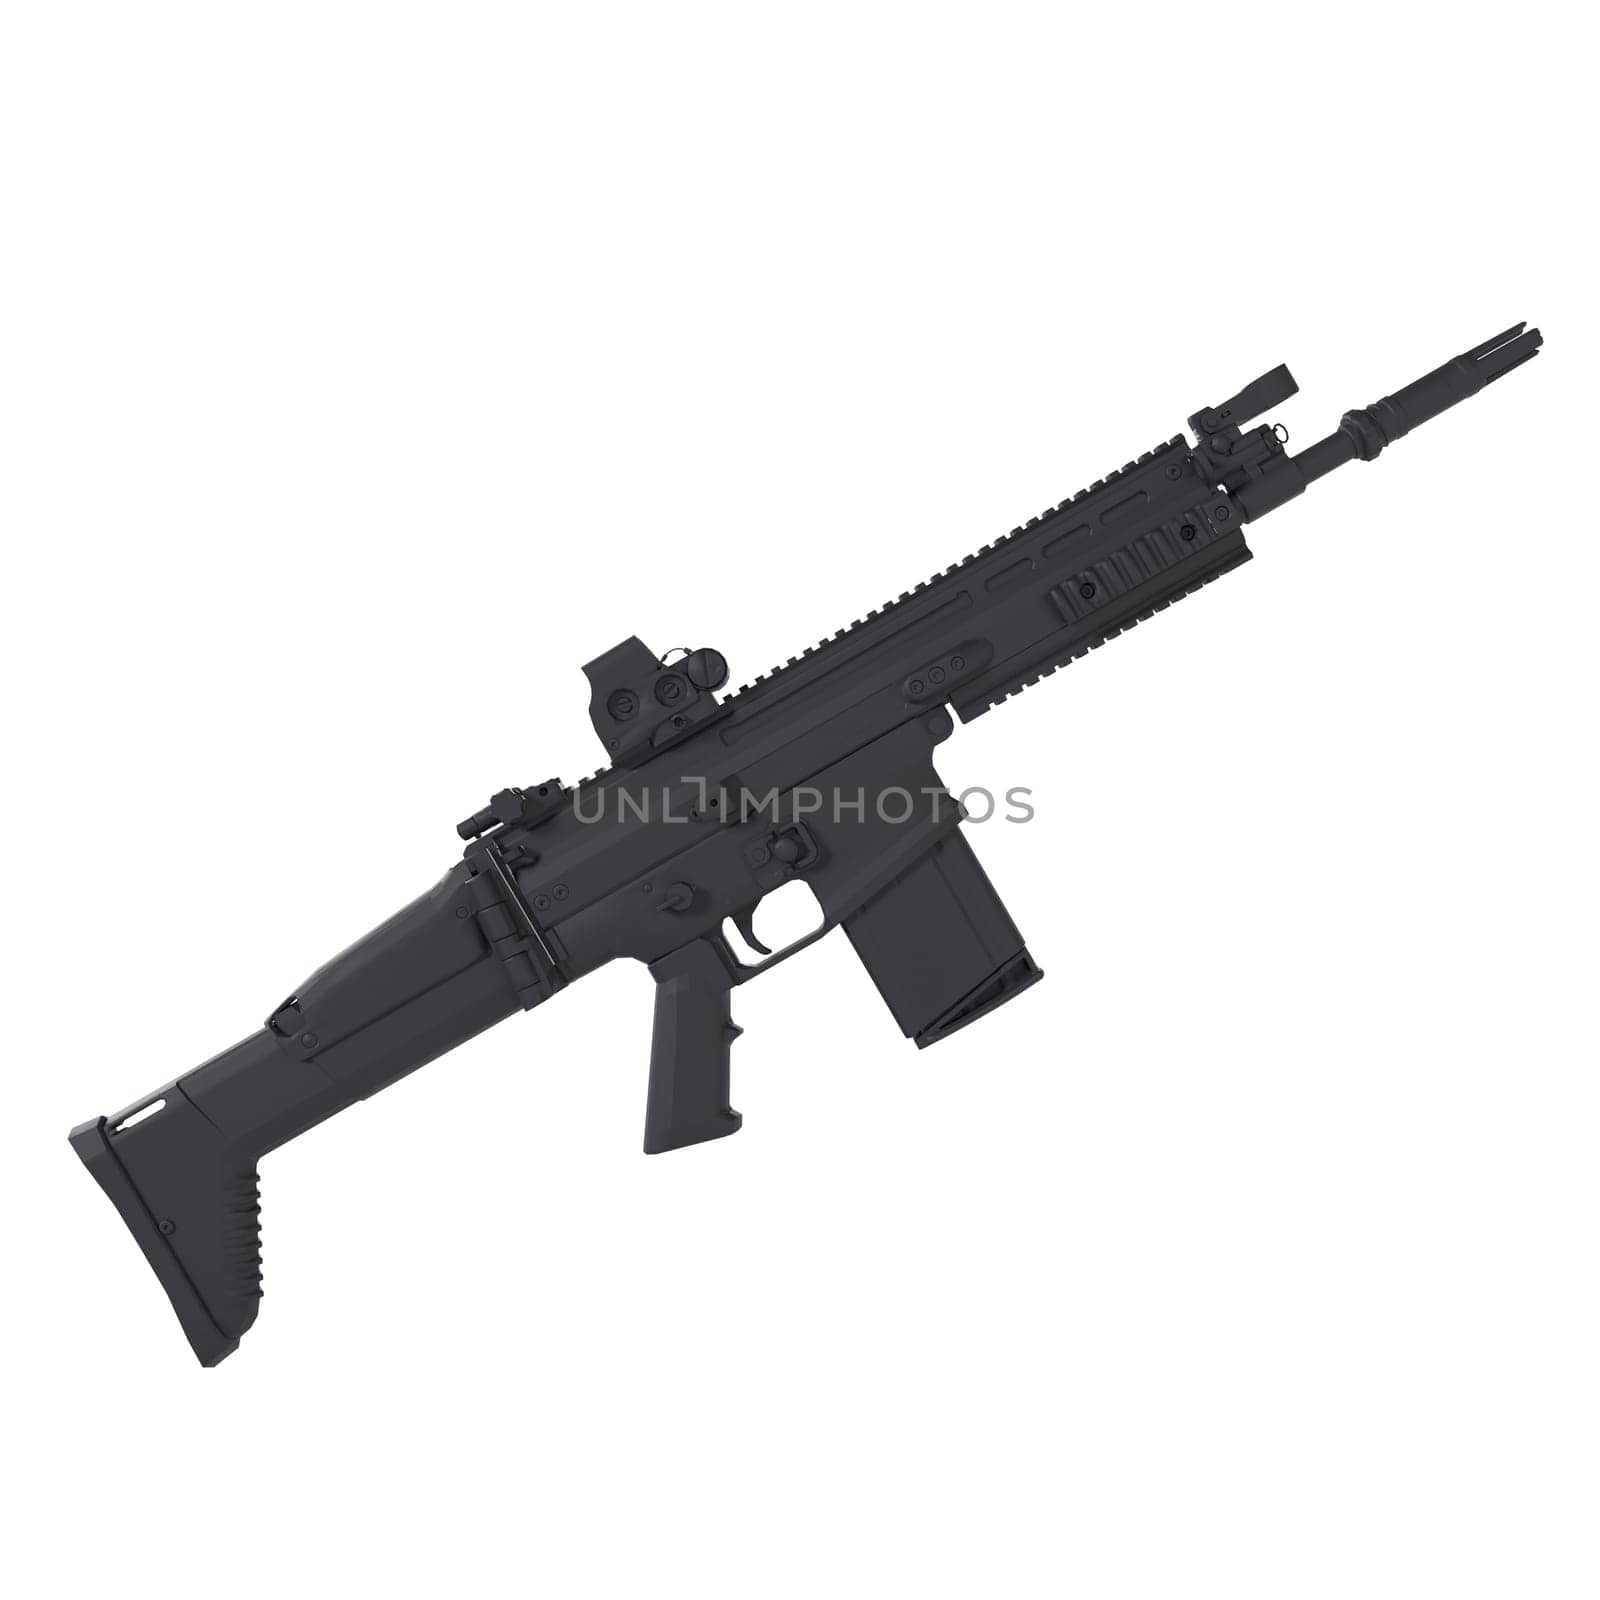 Scar Rifle isolated on white background. High quality 3d illustration